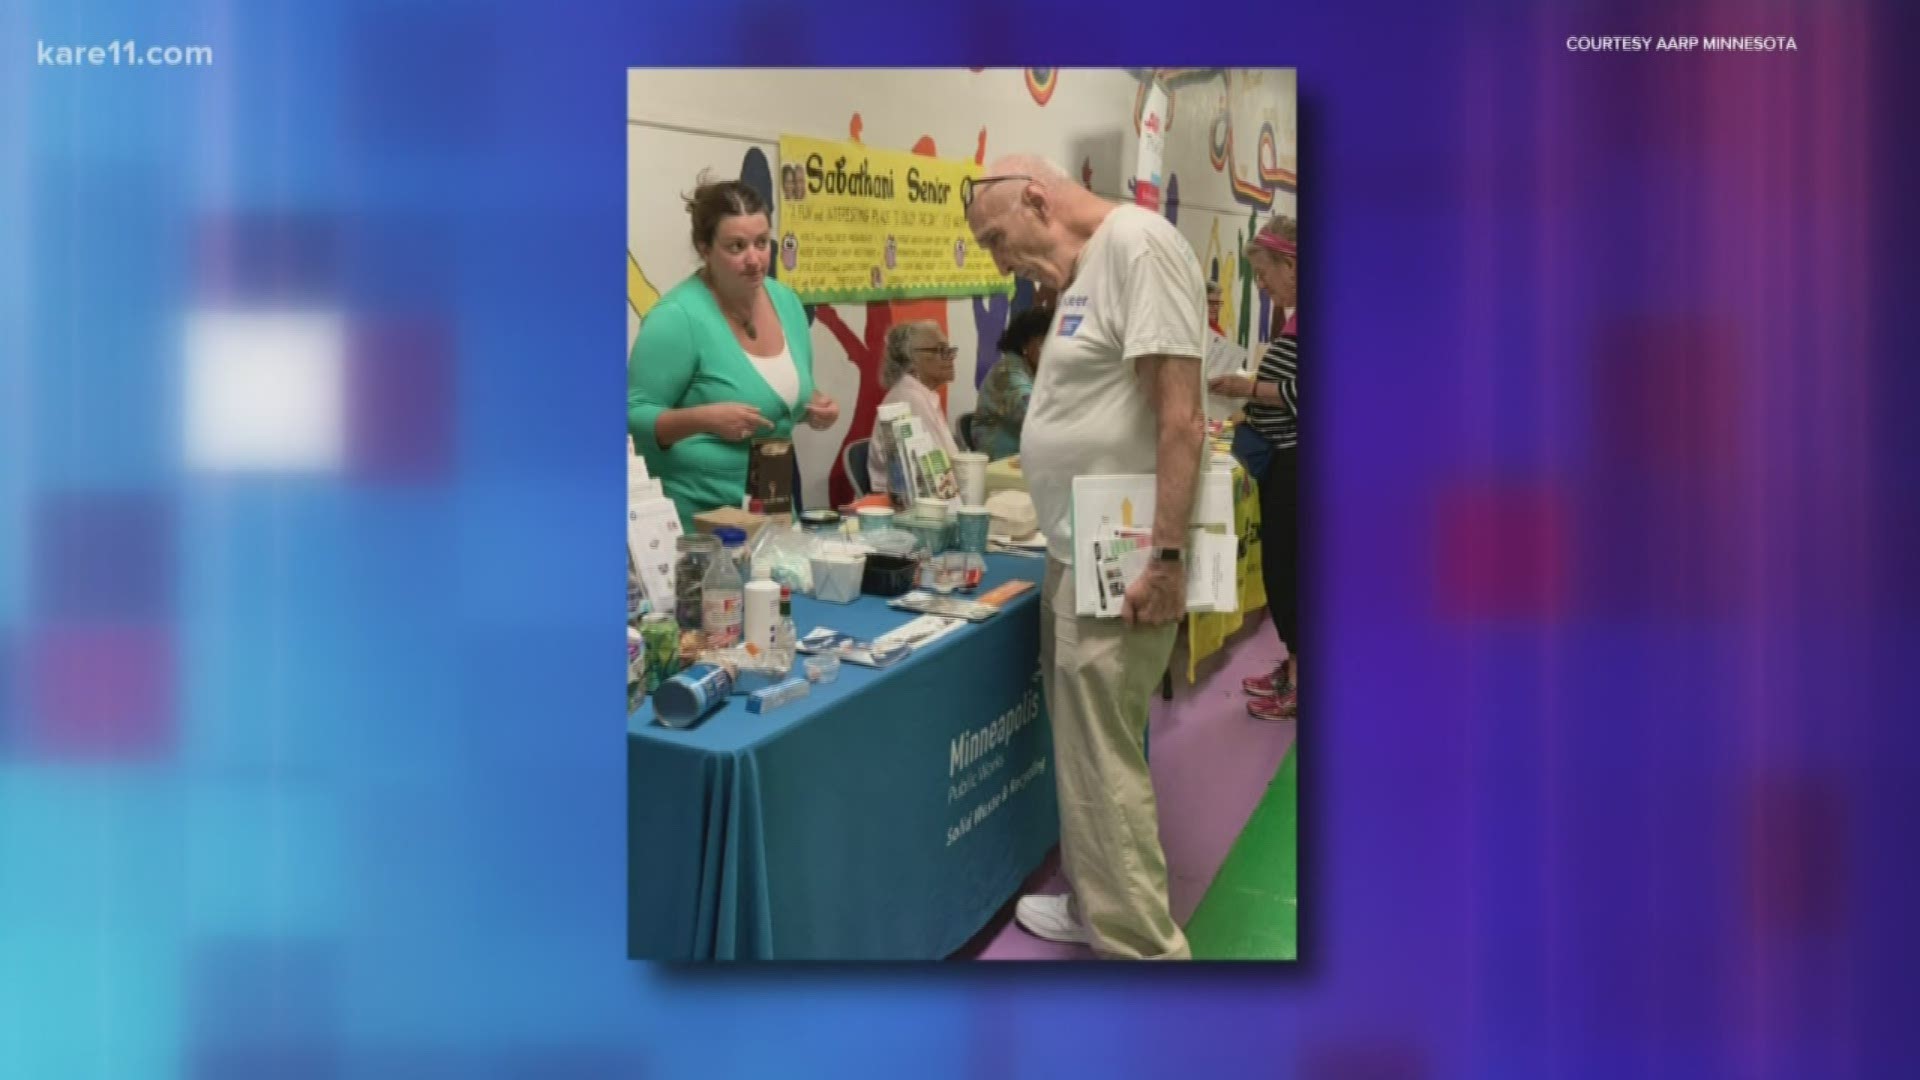 Free interactive aging fair offers seniors in Minneapolis much needed community support.